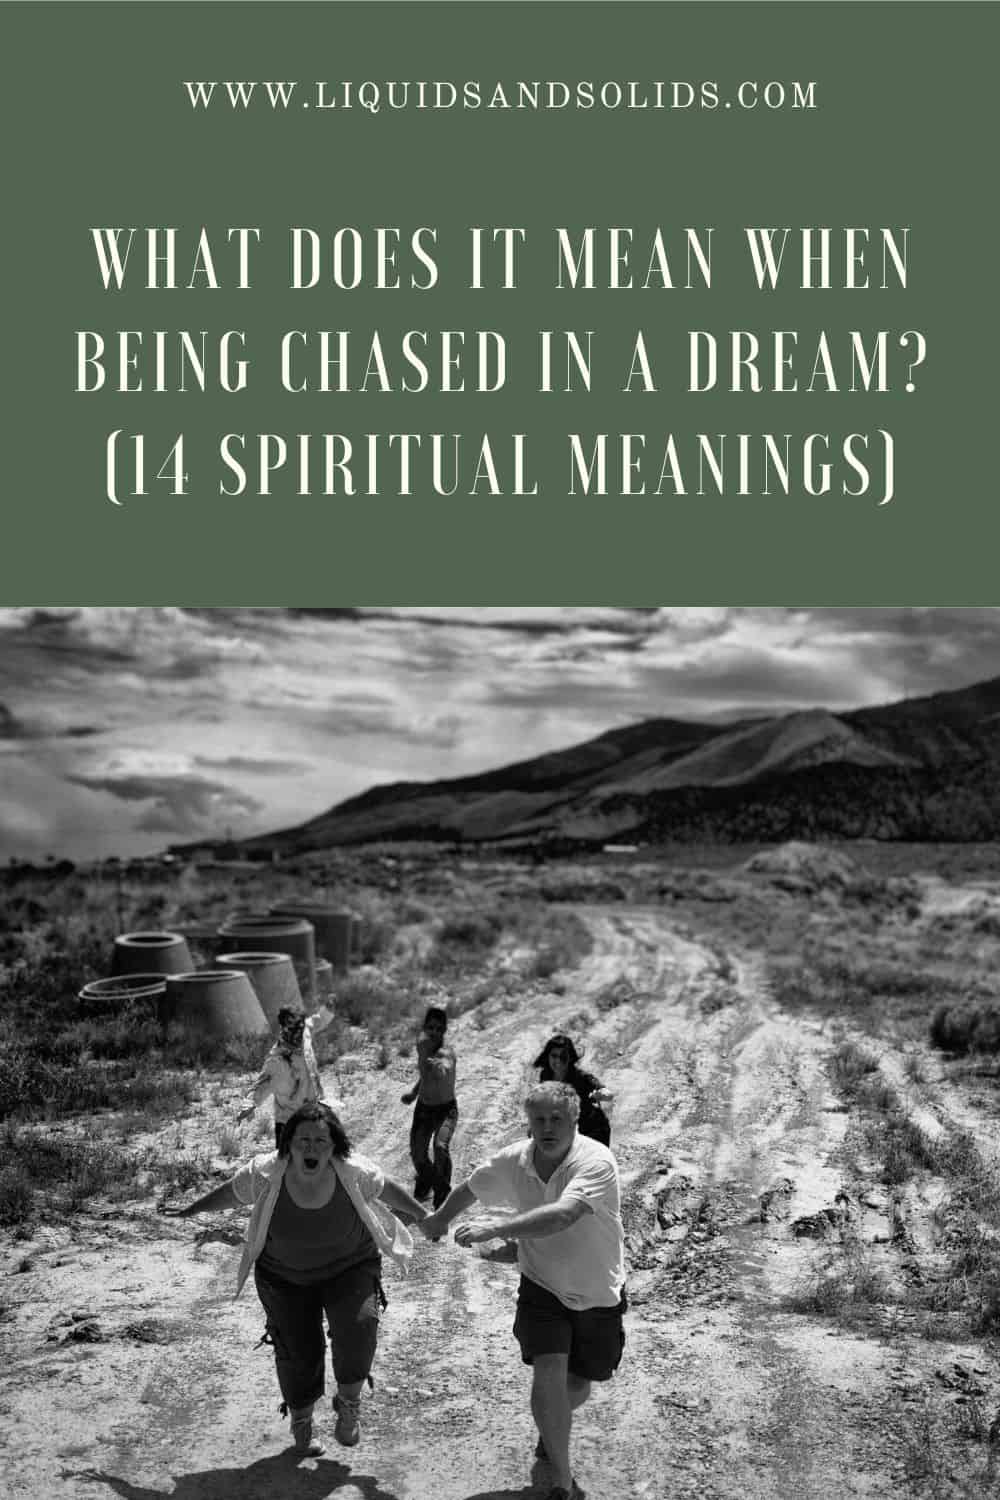 What Does It Mean When Being Chased In A Dream? (14 Spiritual Meanings)